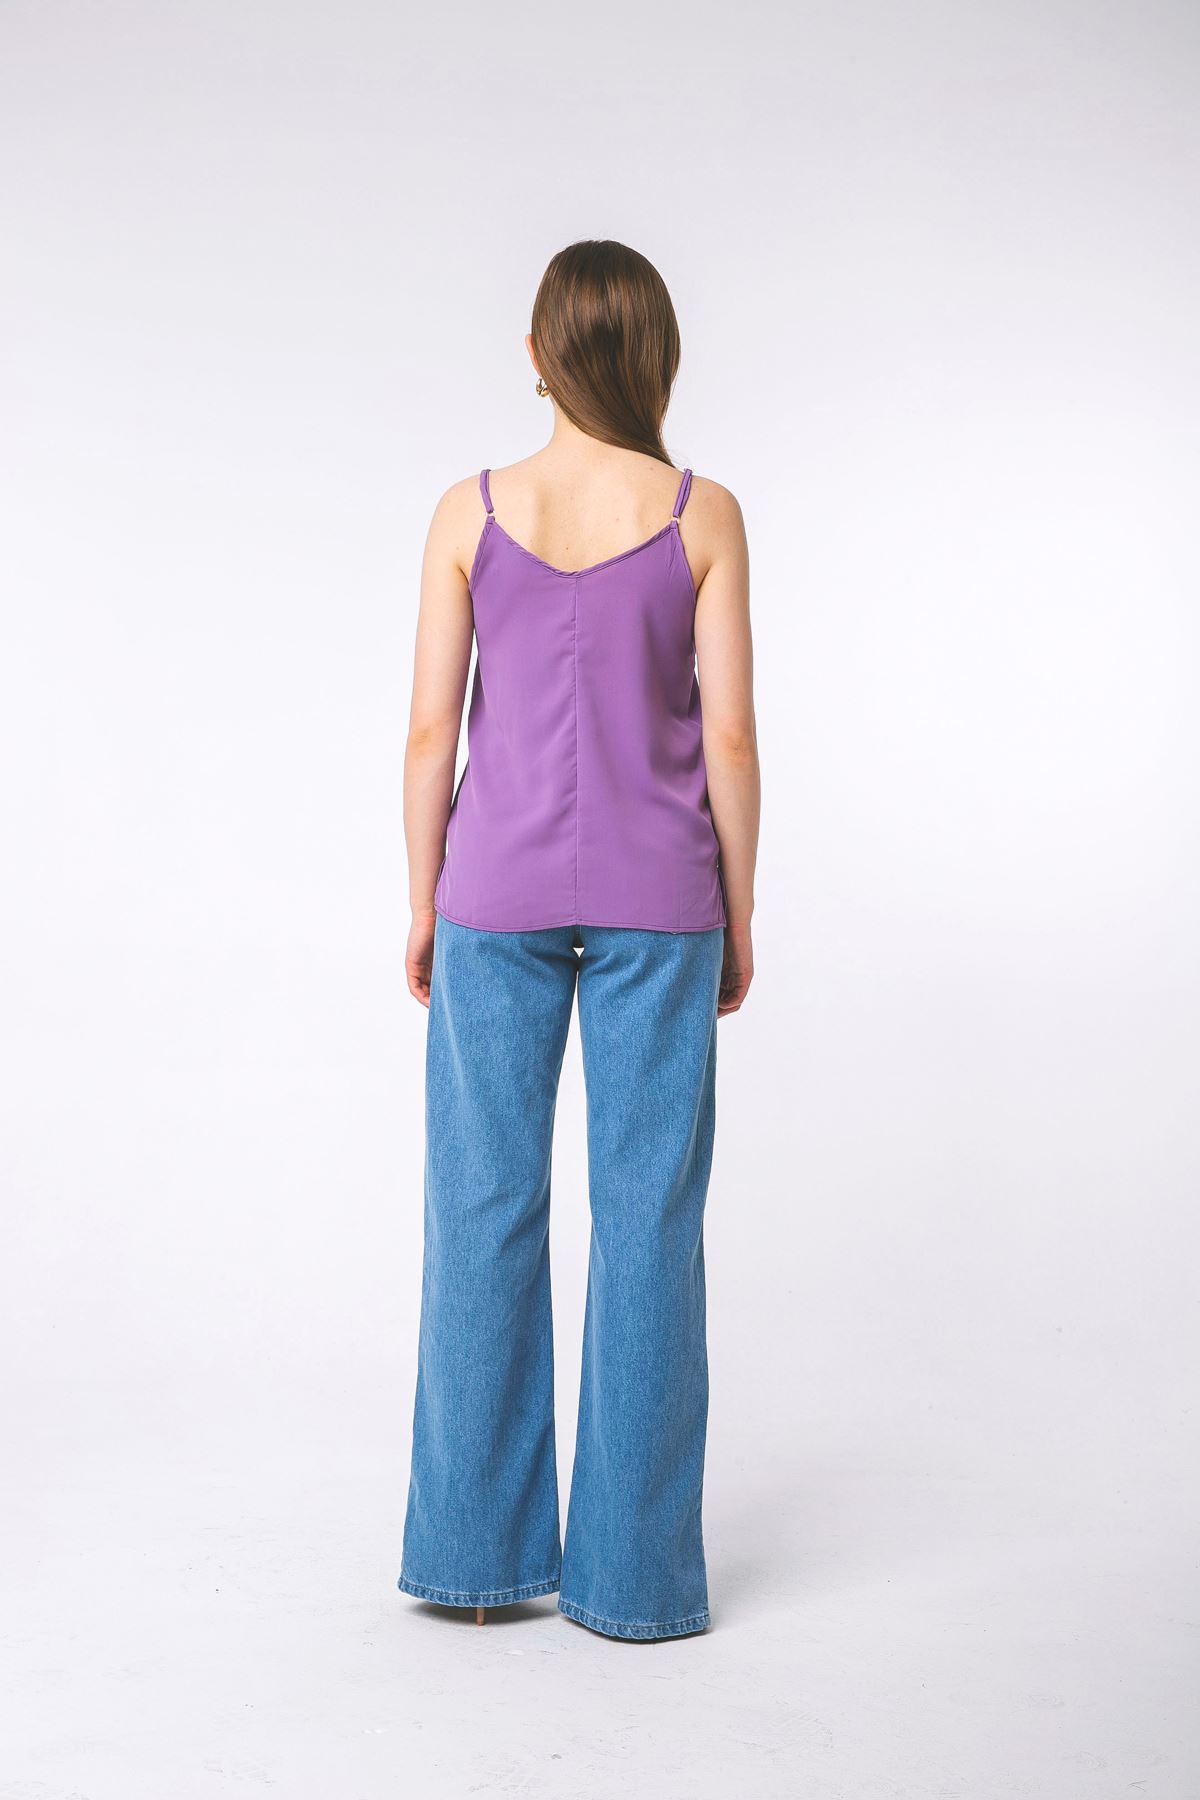 Jesica Fabric On The Straps V-Neck Blouse- Lilac